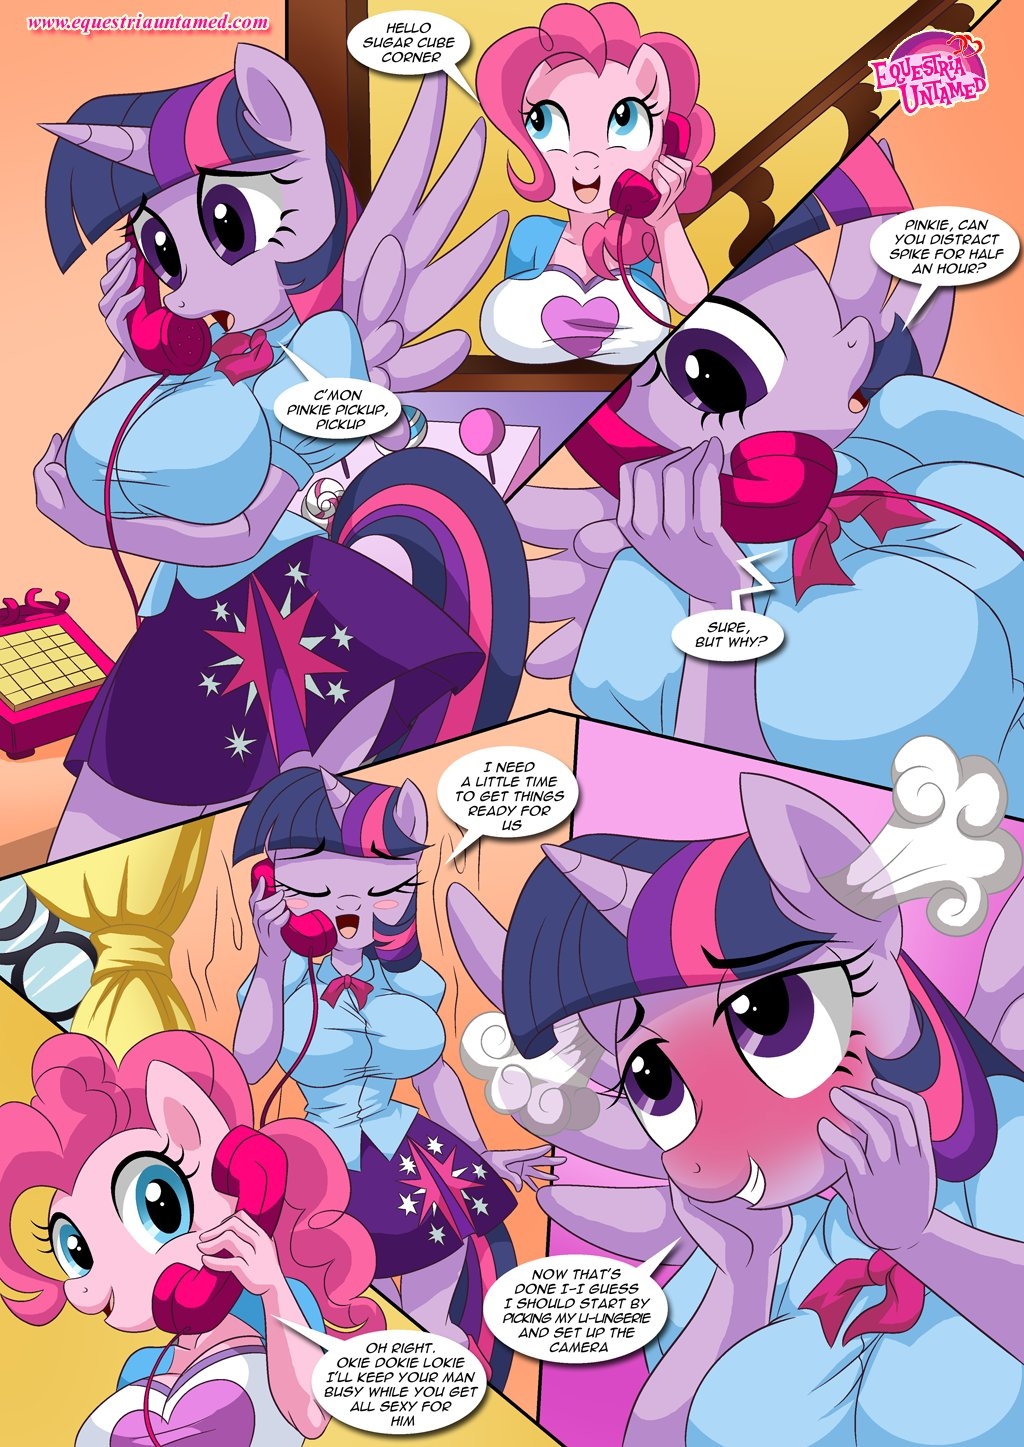 [Palcomix] Sex Ed with Miss Twilight Sparkle (My Little Pony Friendship is Magic) 10